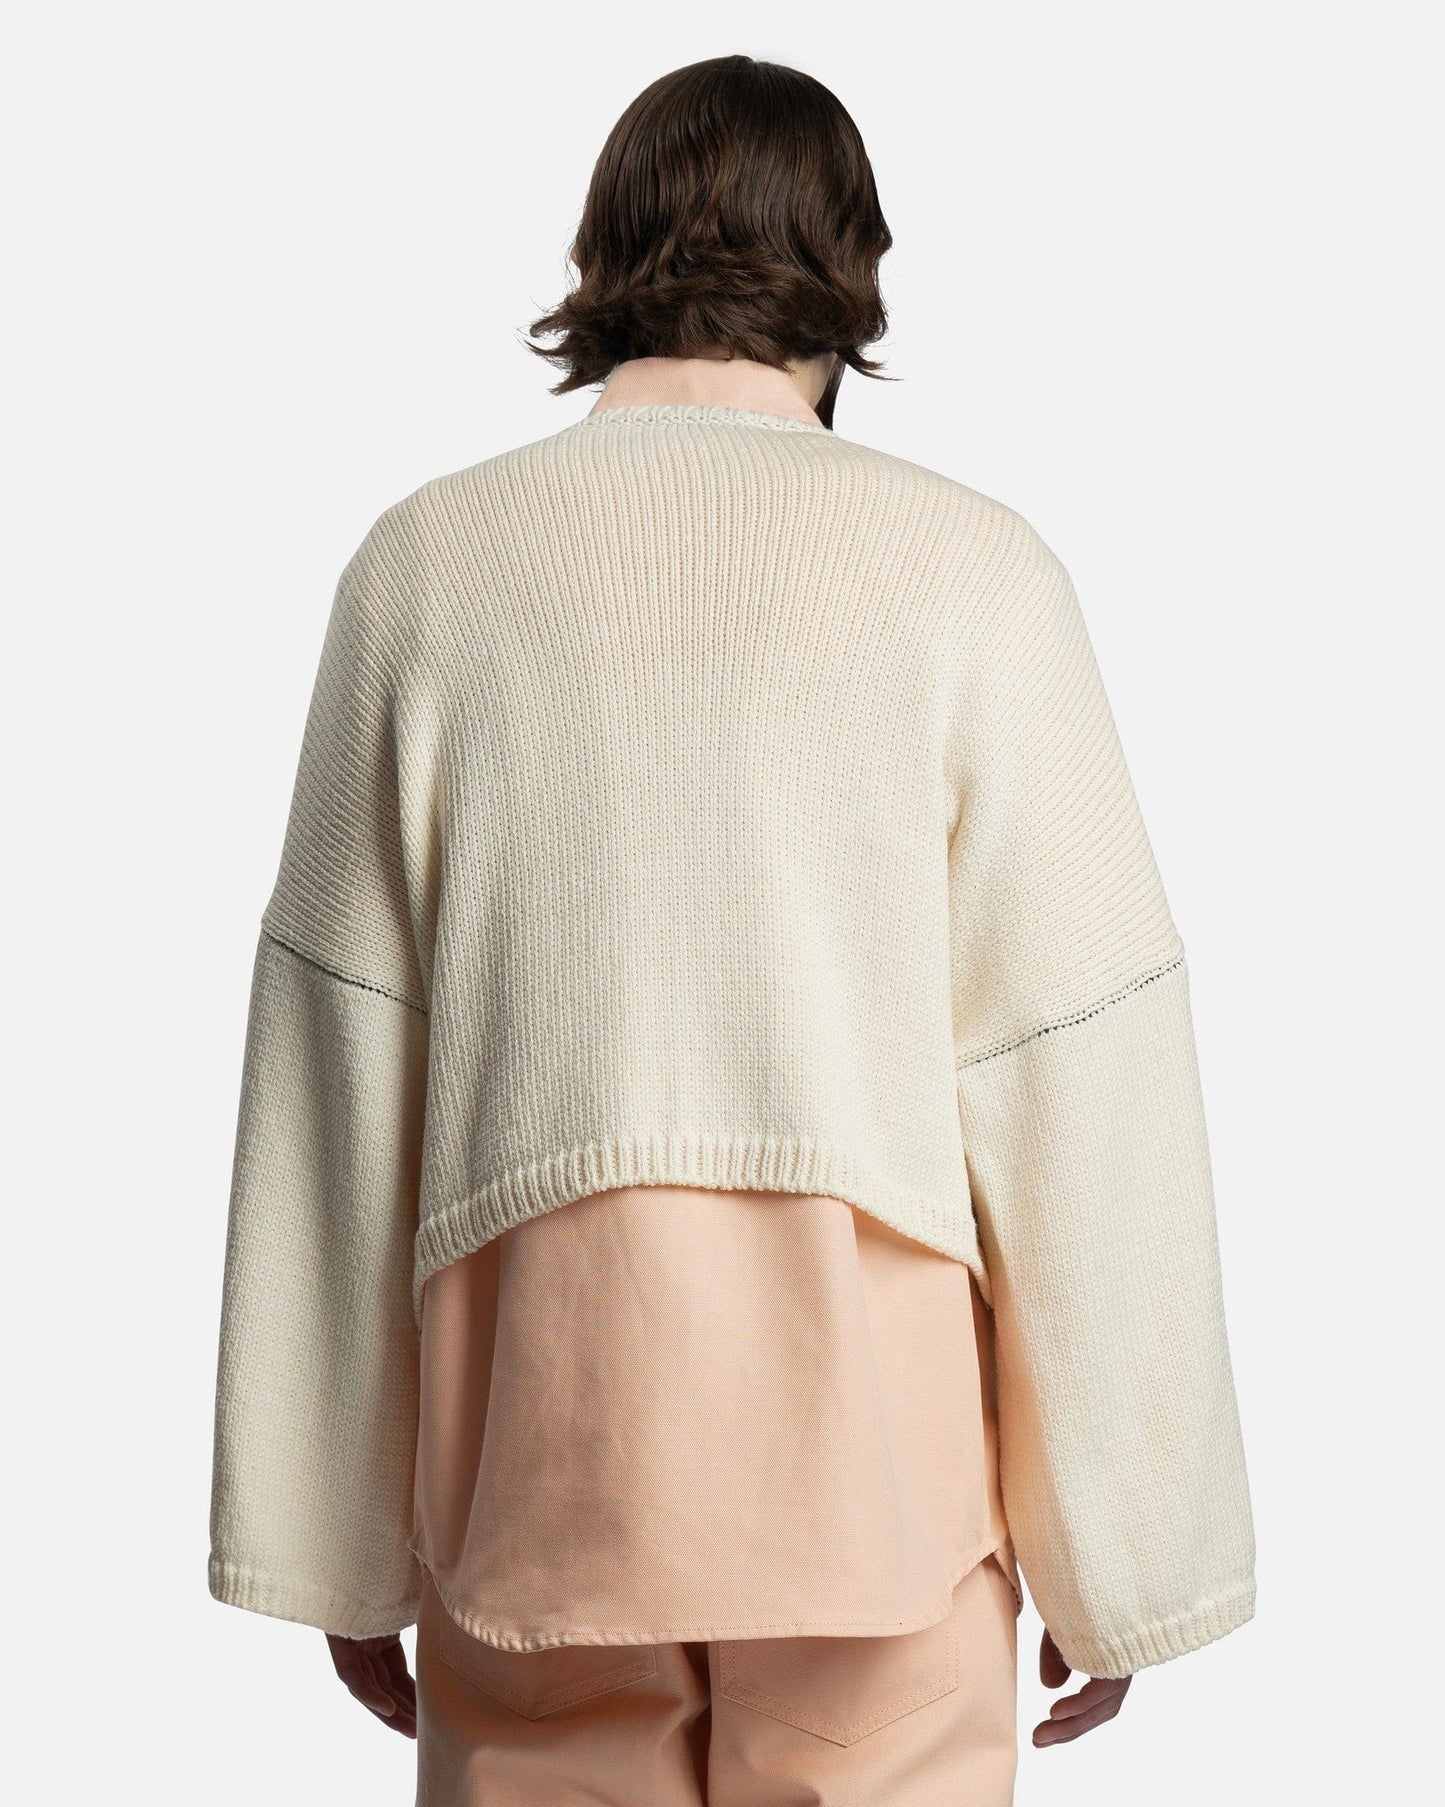 Raf Simons Men's Sweater R Jacquard Bulky Knit Sweater in Pearl